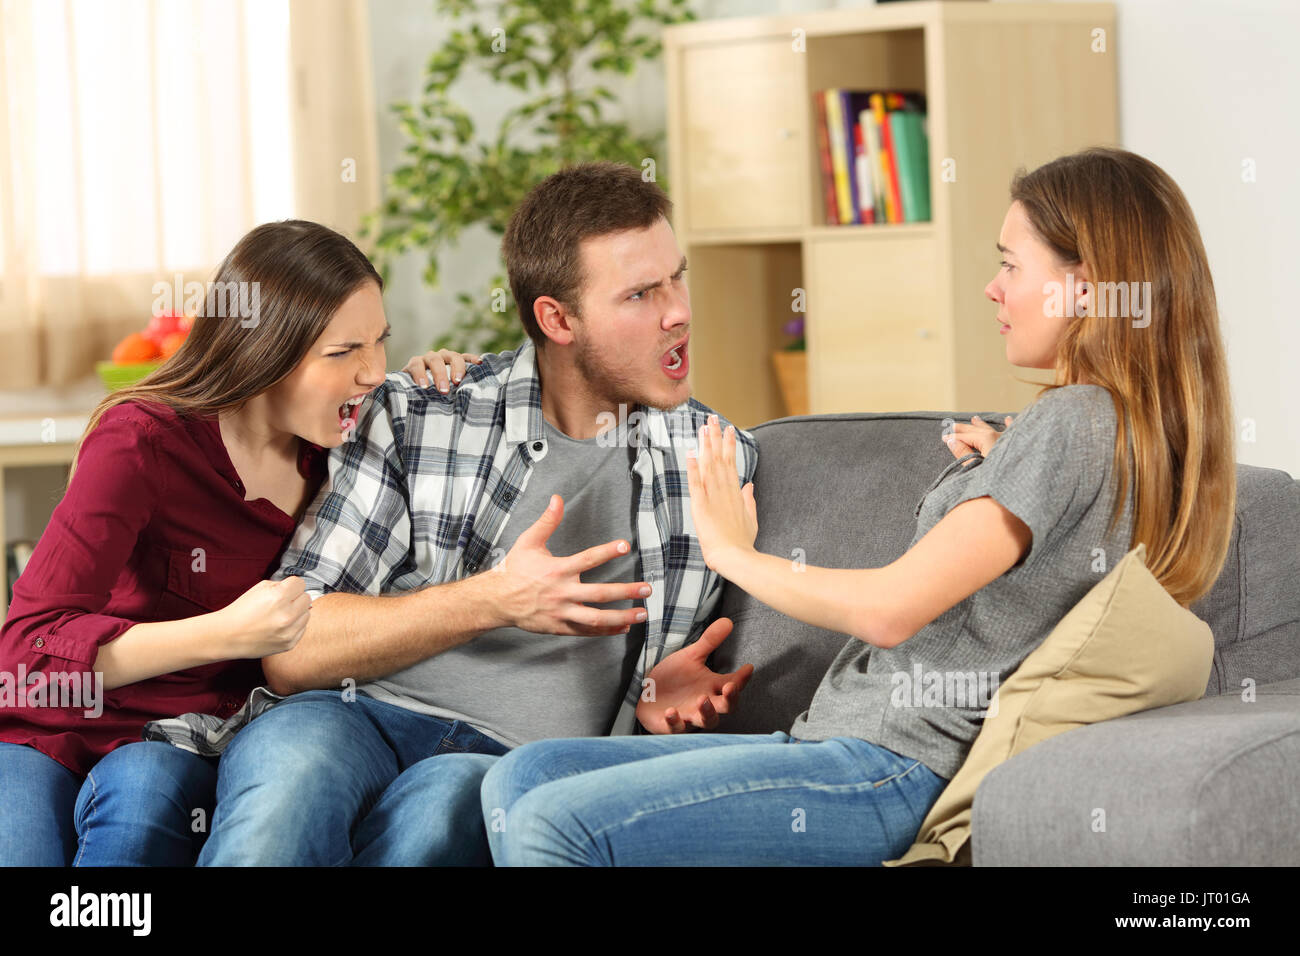 Roommates arguing and shouting each other on a sofa at home Stock Photo